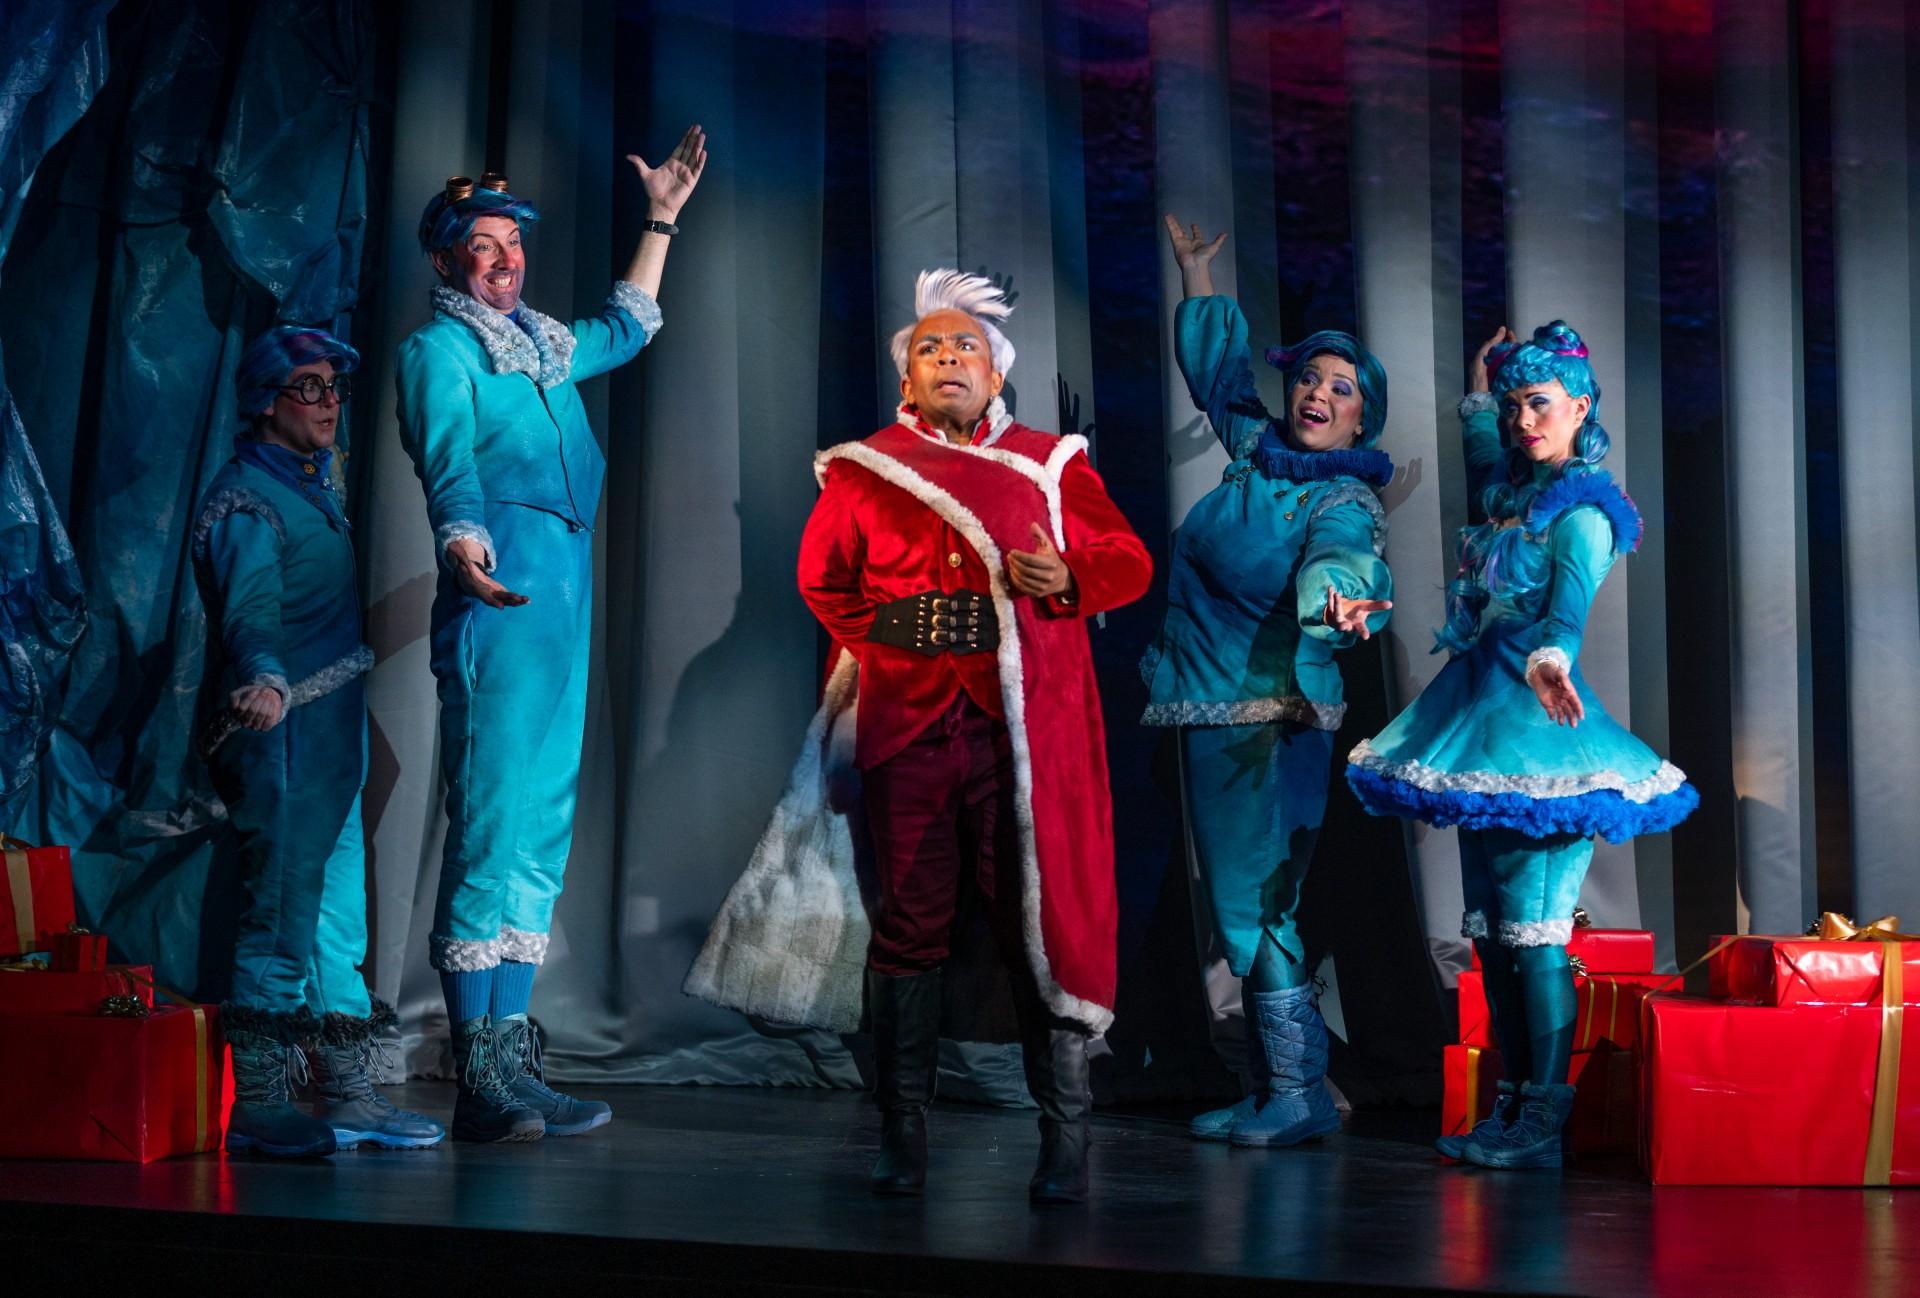 Justin Berkowitz (left to right), Matt Boehler, Martin Bakari, Leah Dexter and Amy Owens perform in “Becoming Santa Claus.” (Photo by Michael Brosilow)